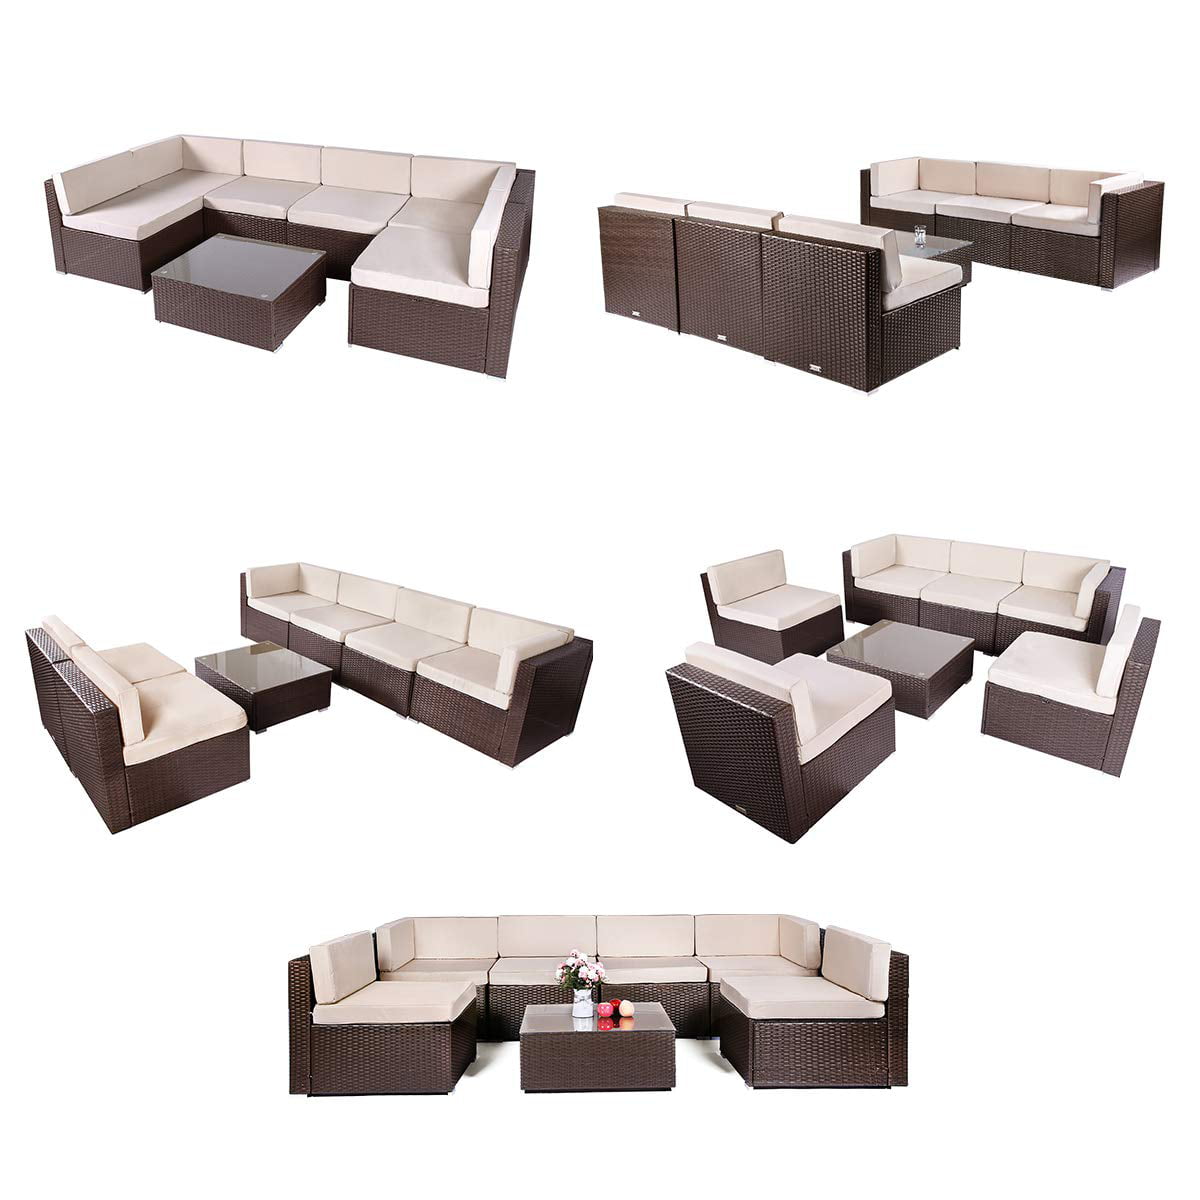 U-MAX 7 Piece Patio PE Rattan Wicker Sofa Set Outdoor Sectional Furniture Chair Set with Cushions and Tea Table Brown 